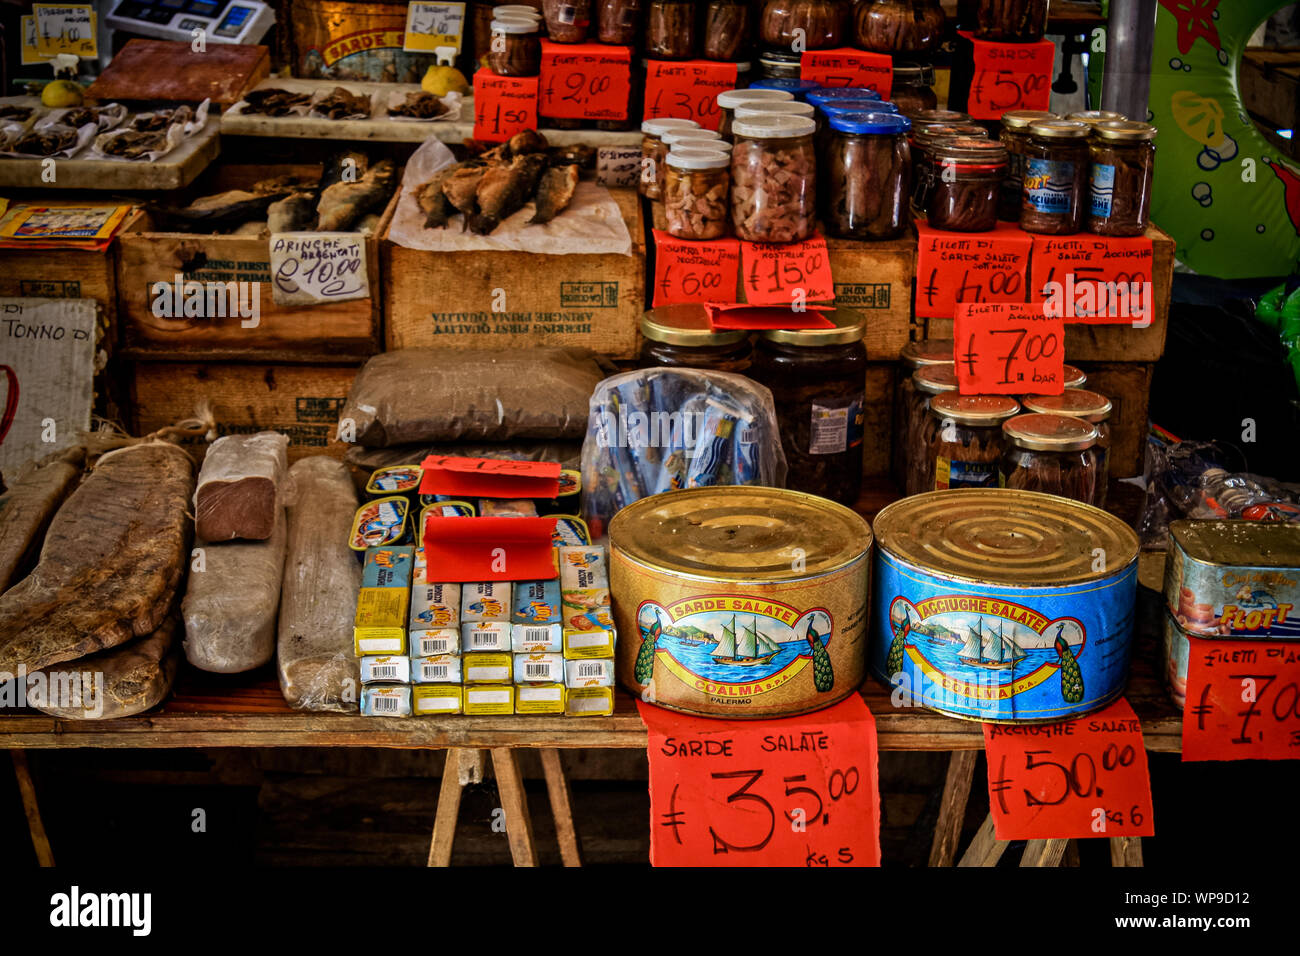 Canned food in the fish market, Palermo, Sicily, Italy Stock Photo